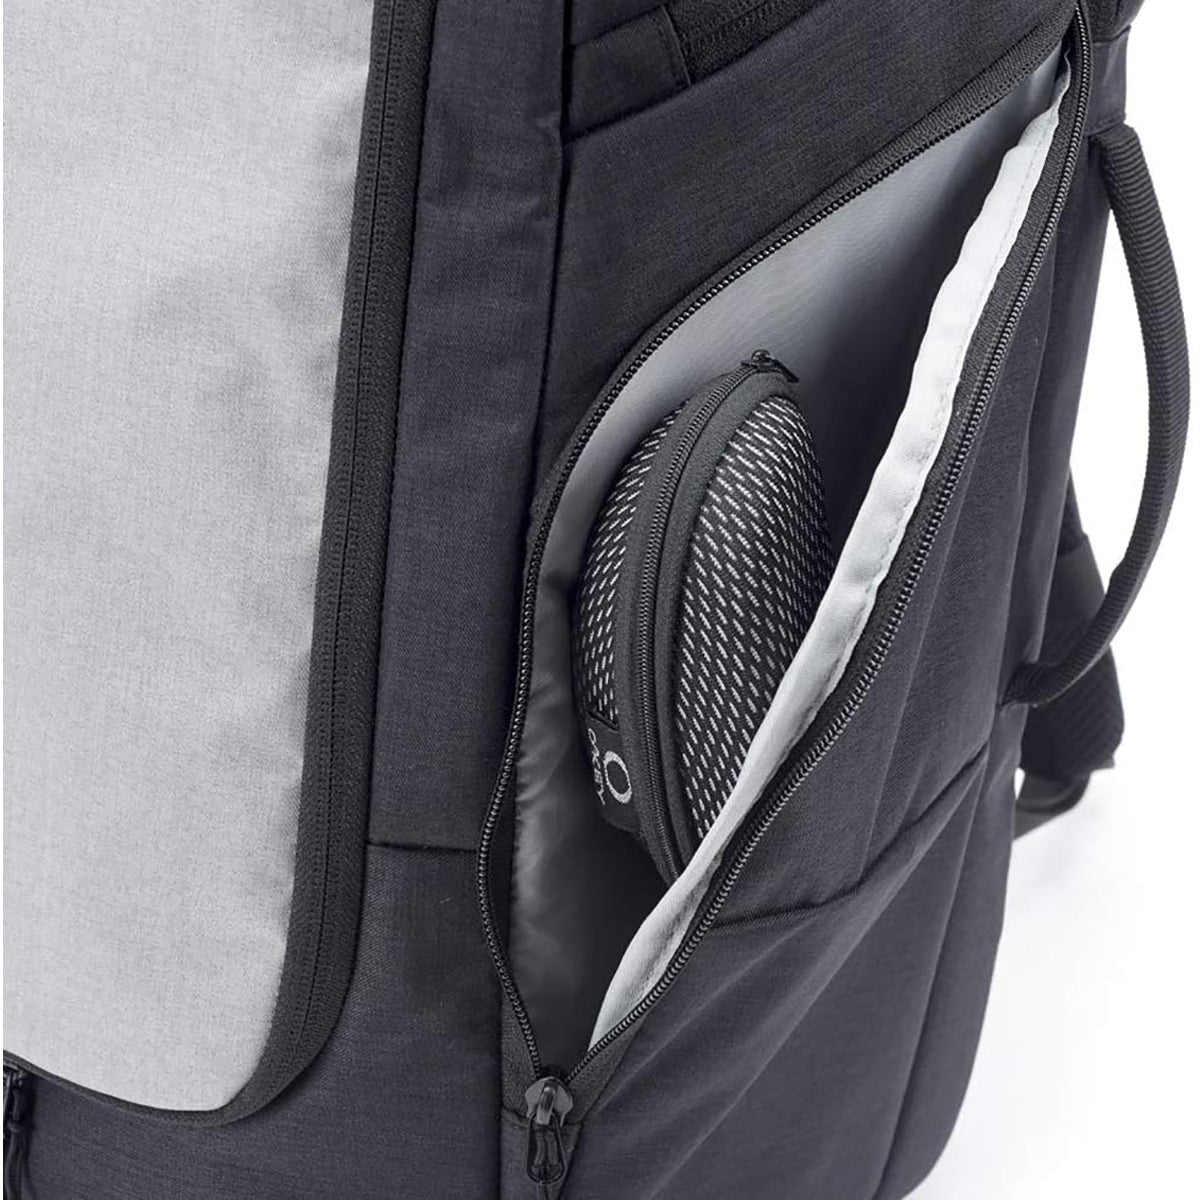 Cliff Keen "The Beast" Athletic Backpack - Black Cliff Keen